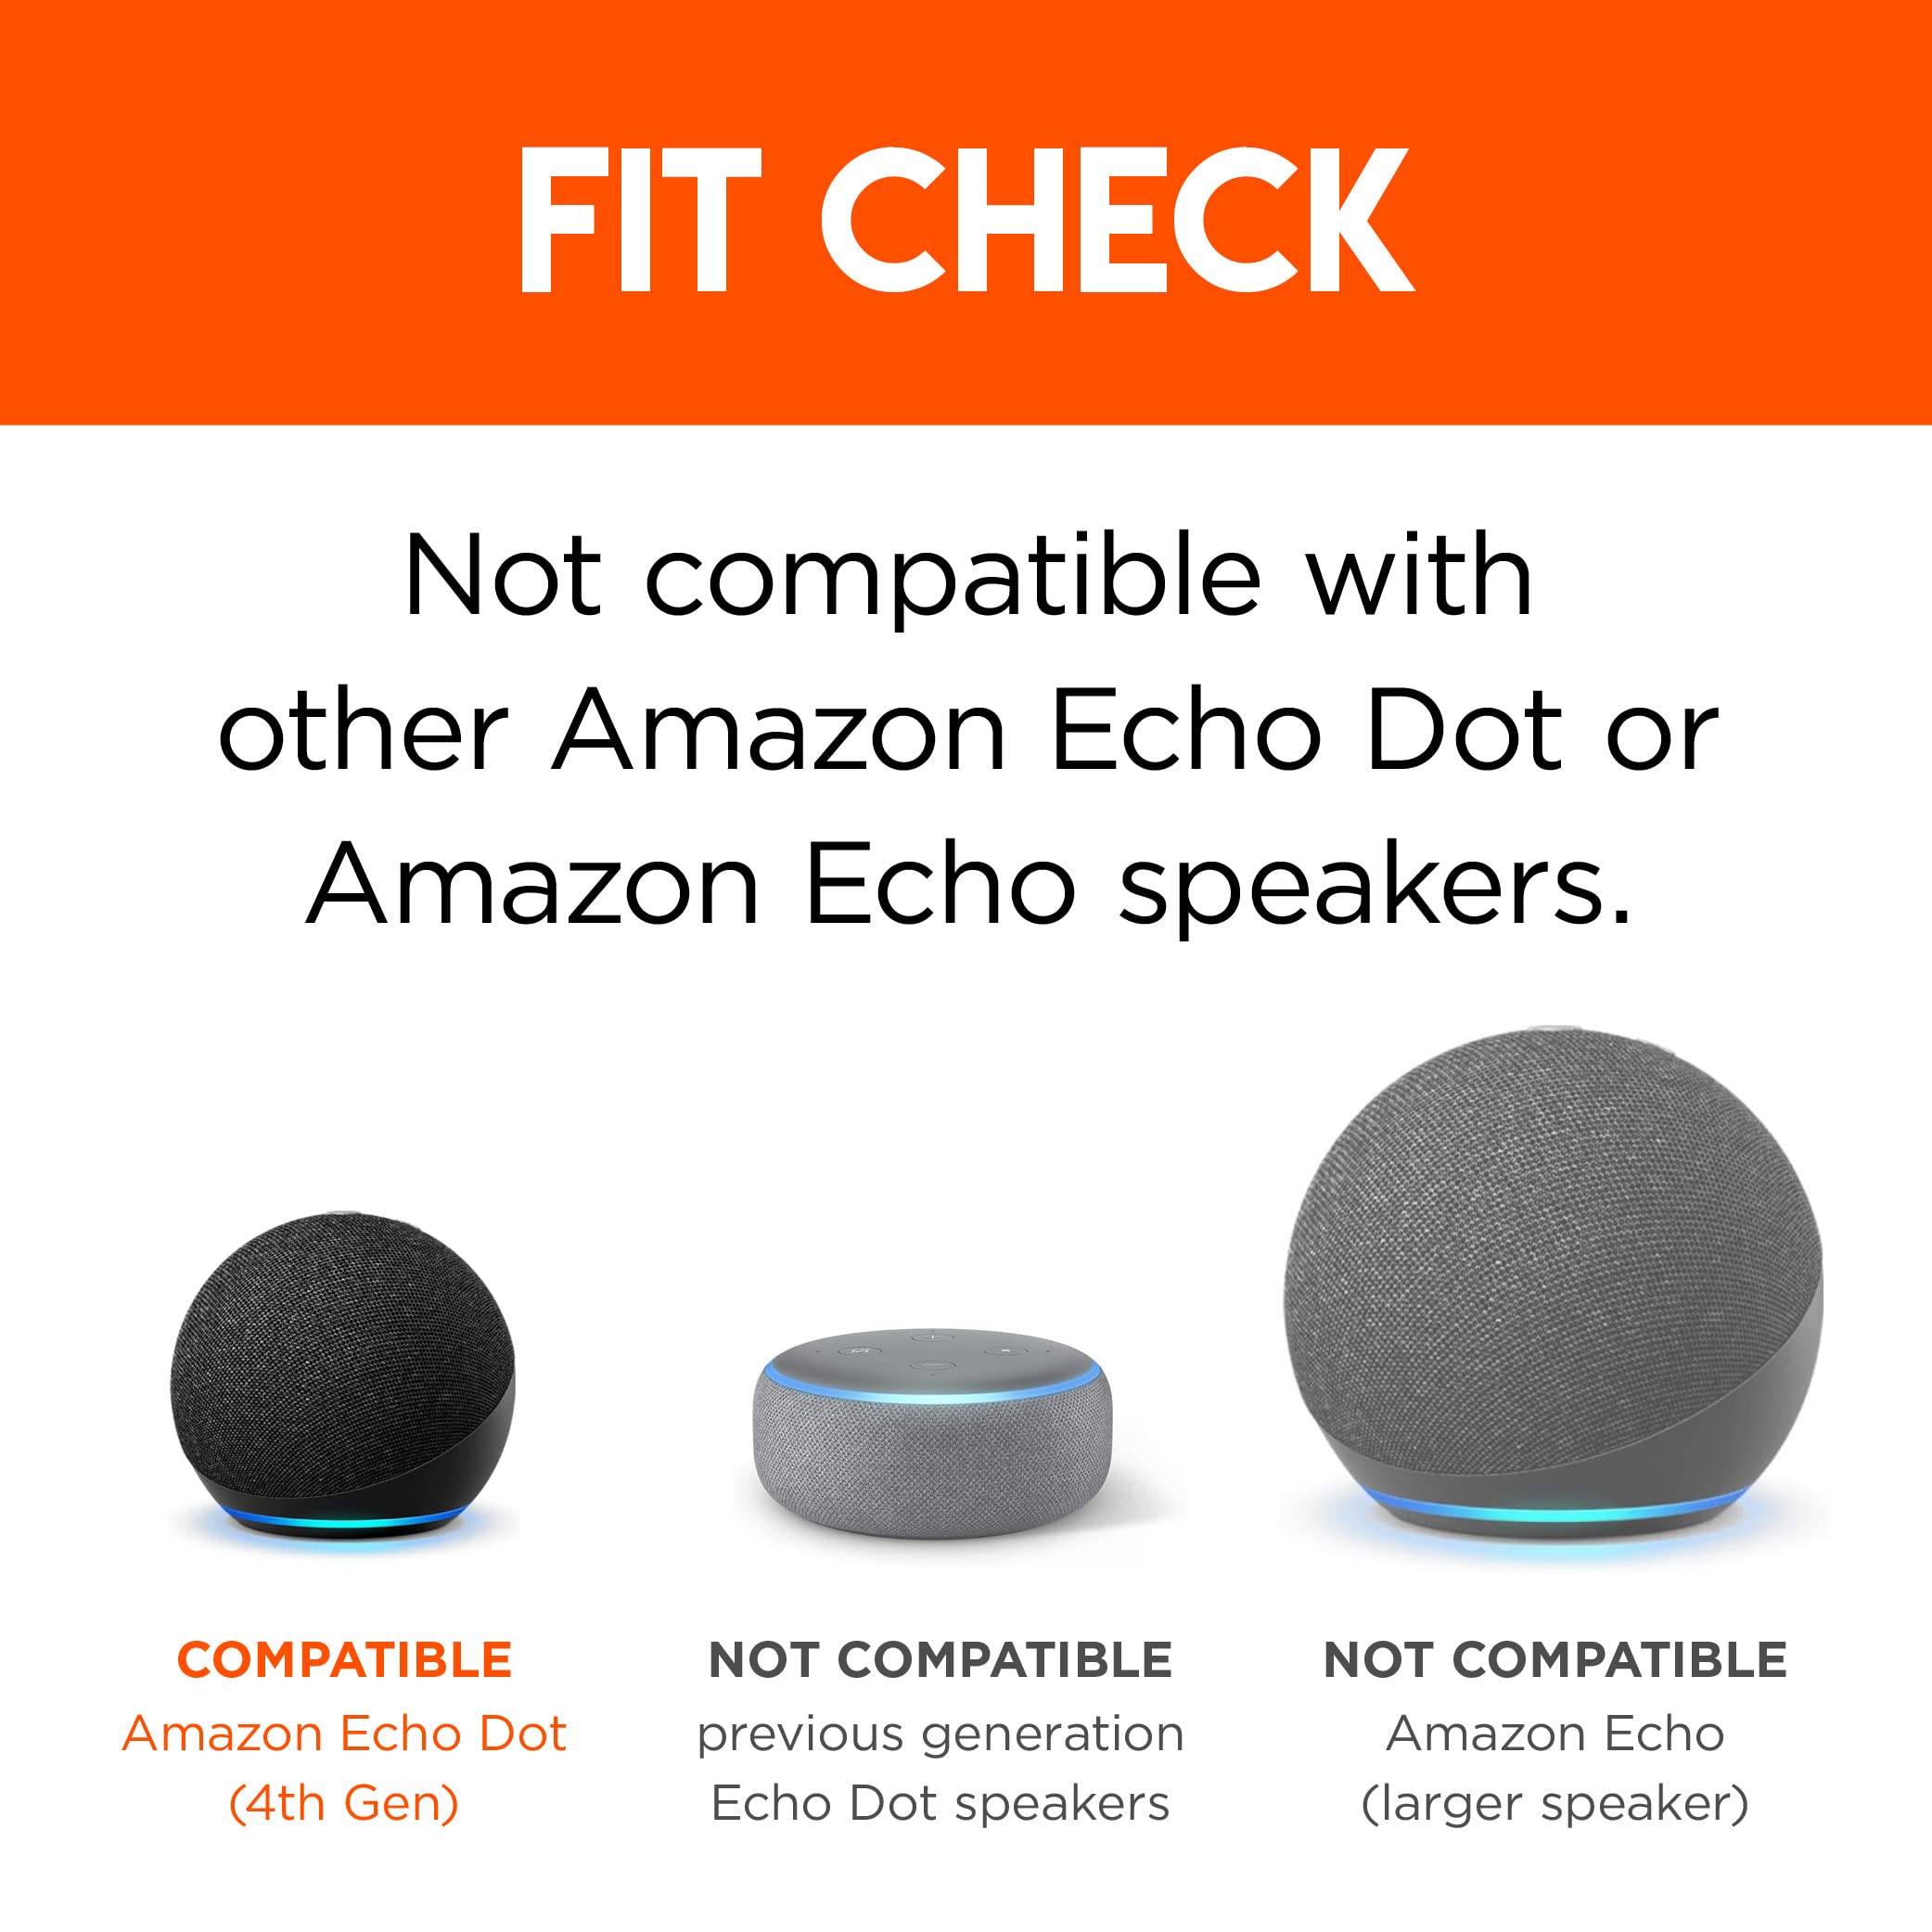 Made For Amazon Outlet Hanger, Black, for Echo Dot (4th generation)